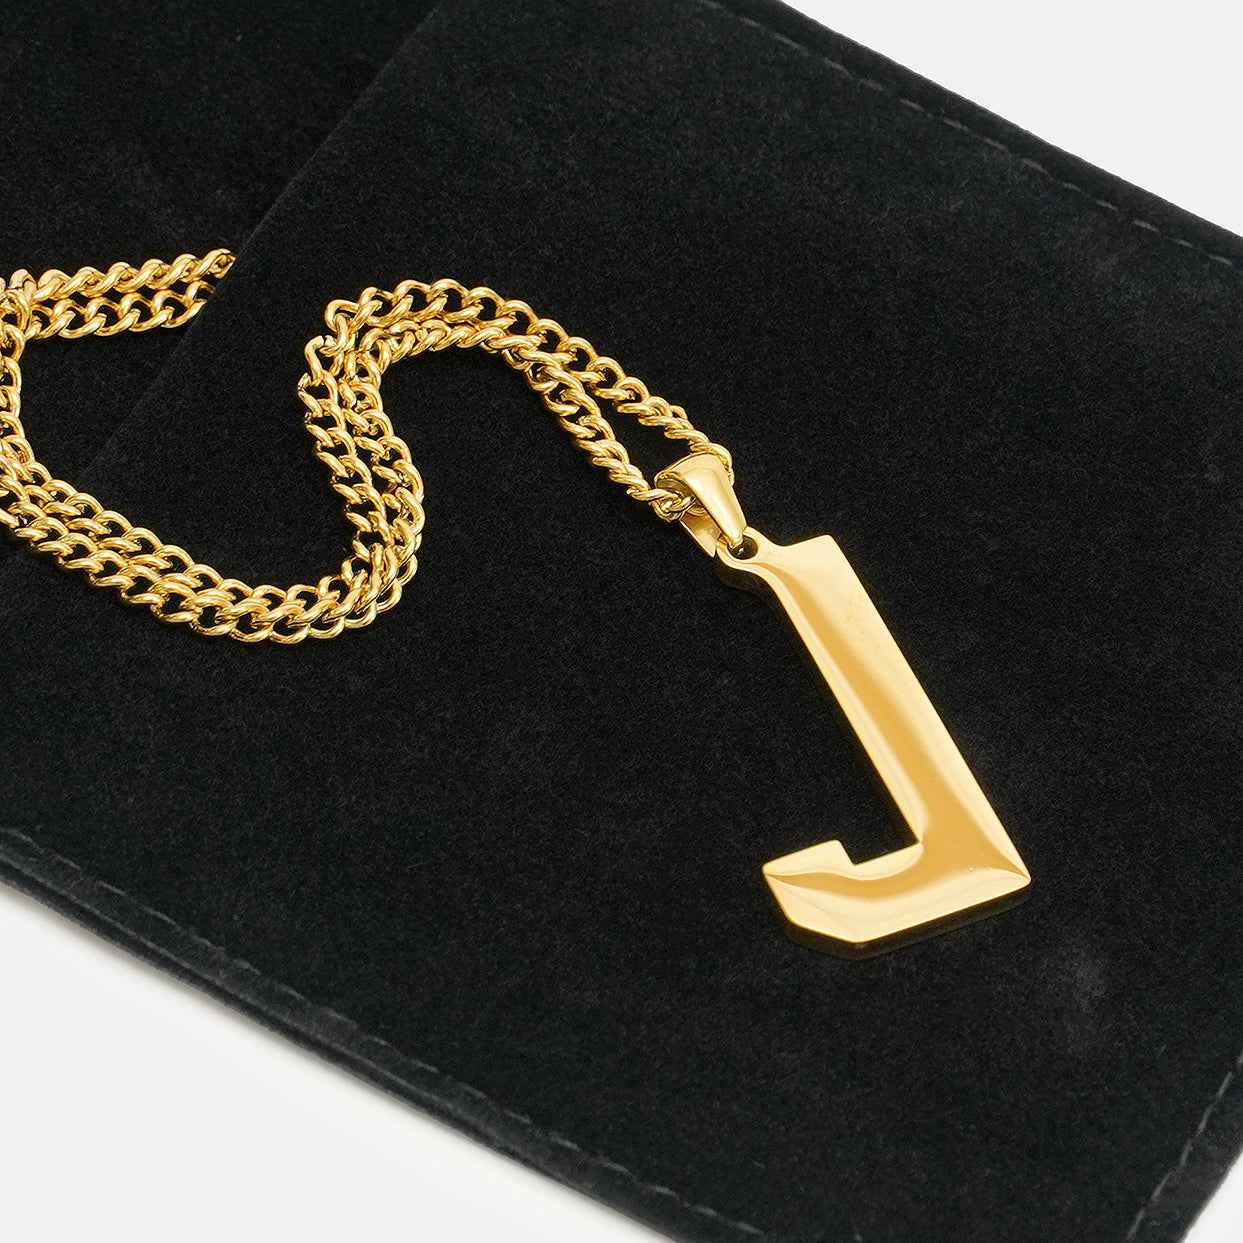 J Letter Pendant with Chain Necklace - Gold Plated Stainless Steel